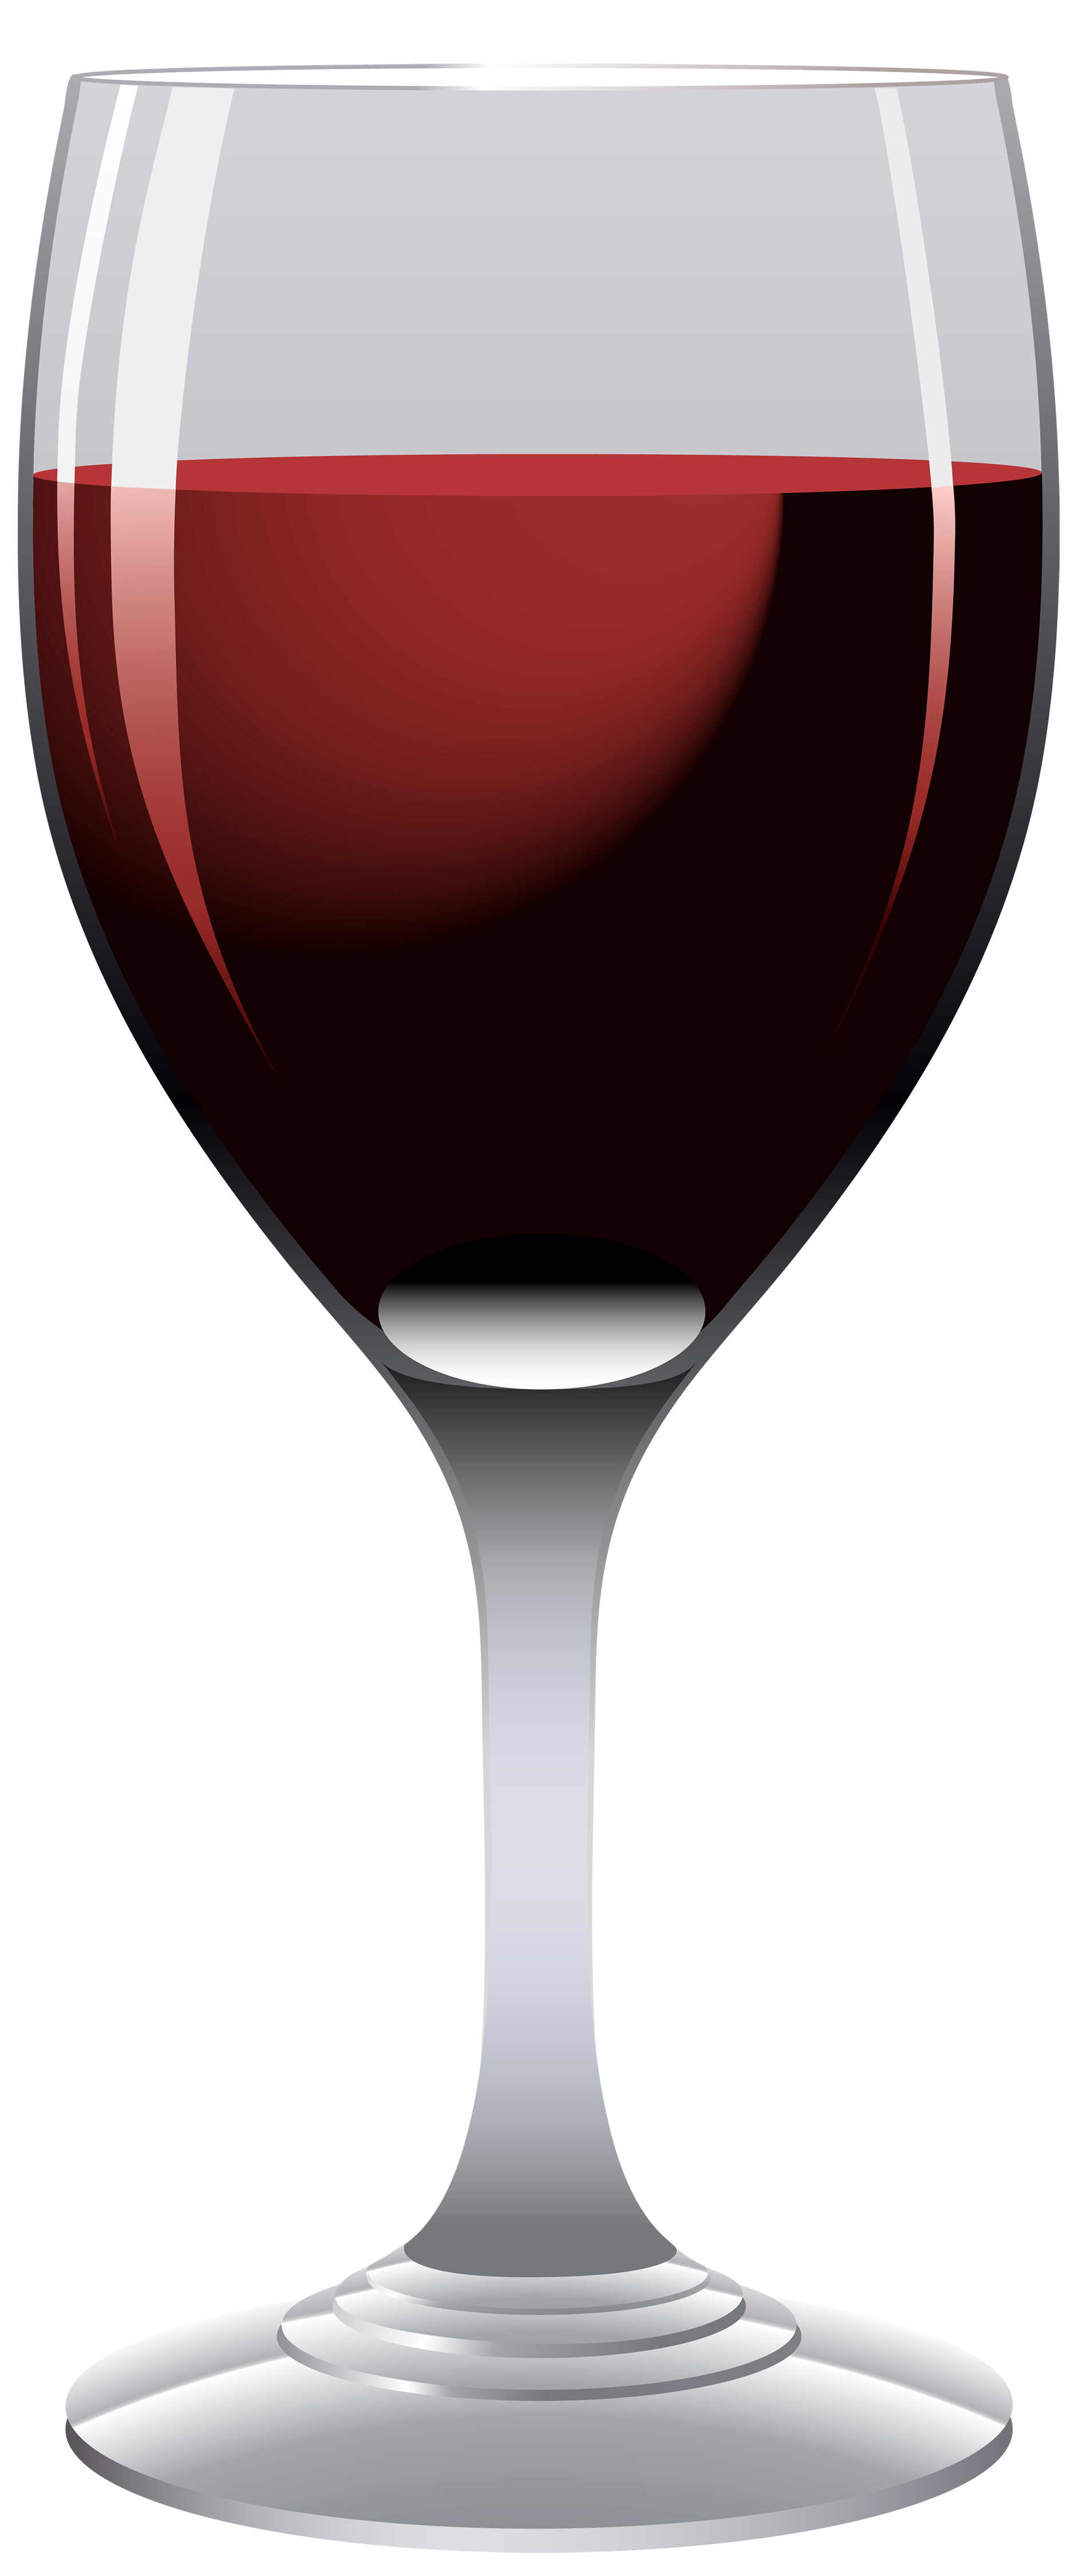 Free clip art wine glasses free vector for free download